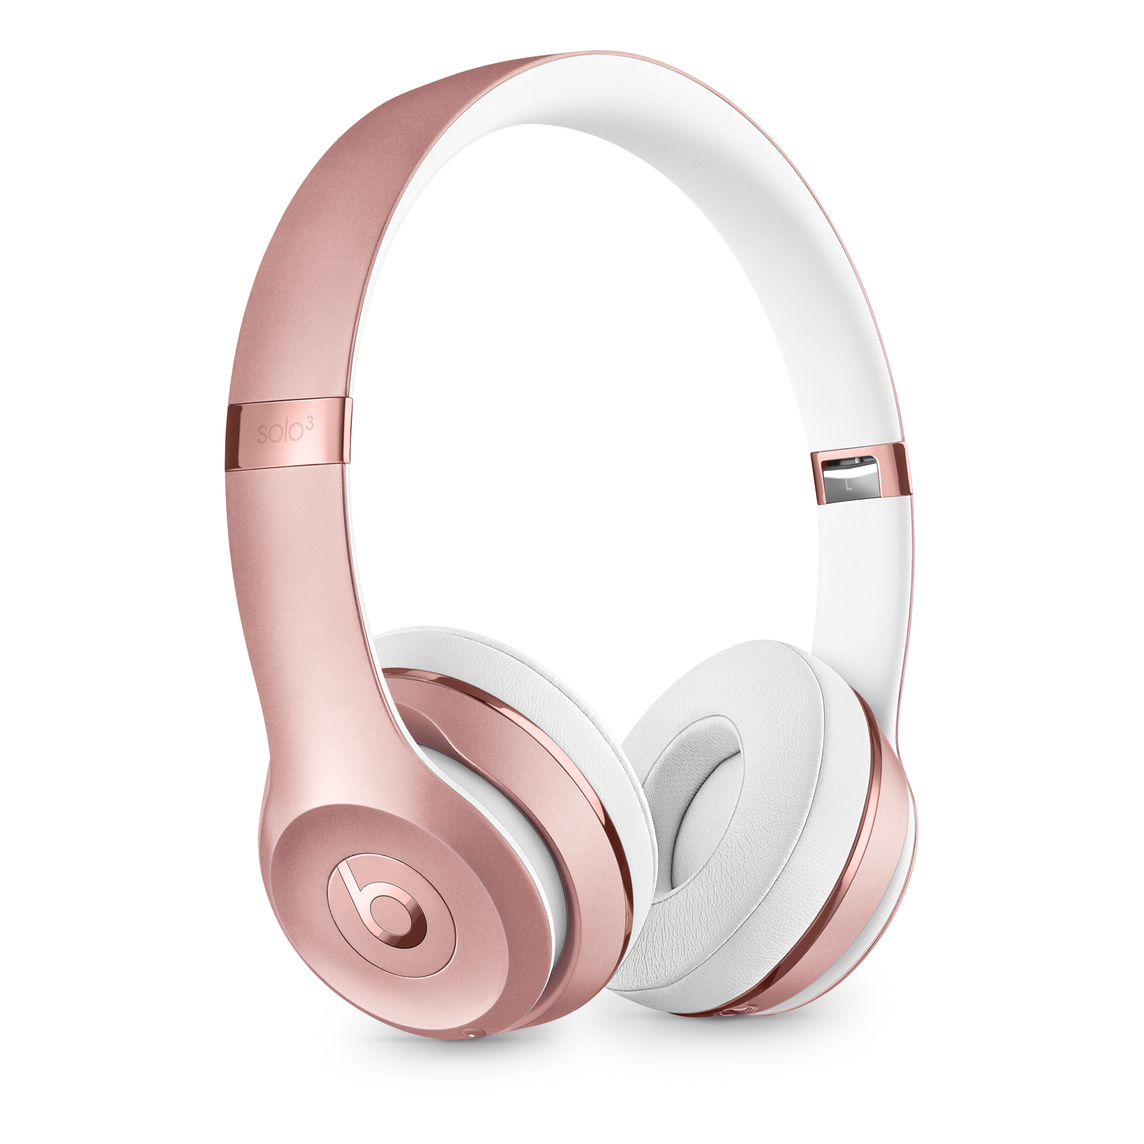  - Audifono On Ear bluetooth Solo 3 Beats Rose Gold 5